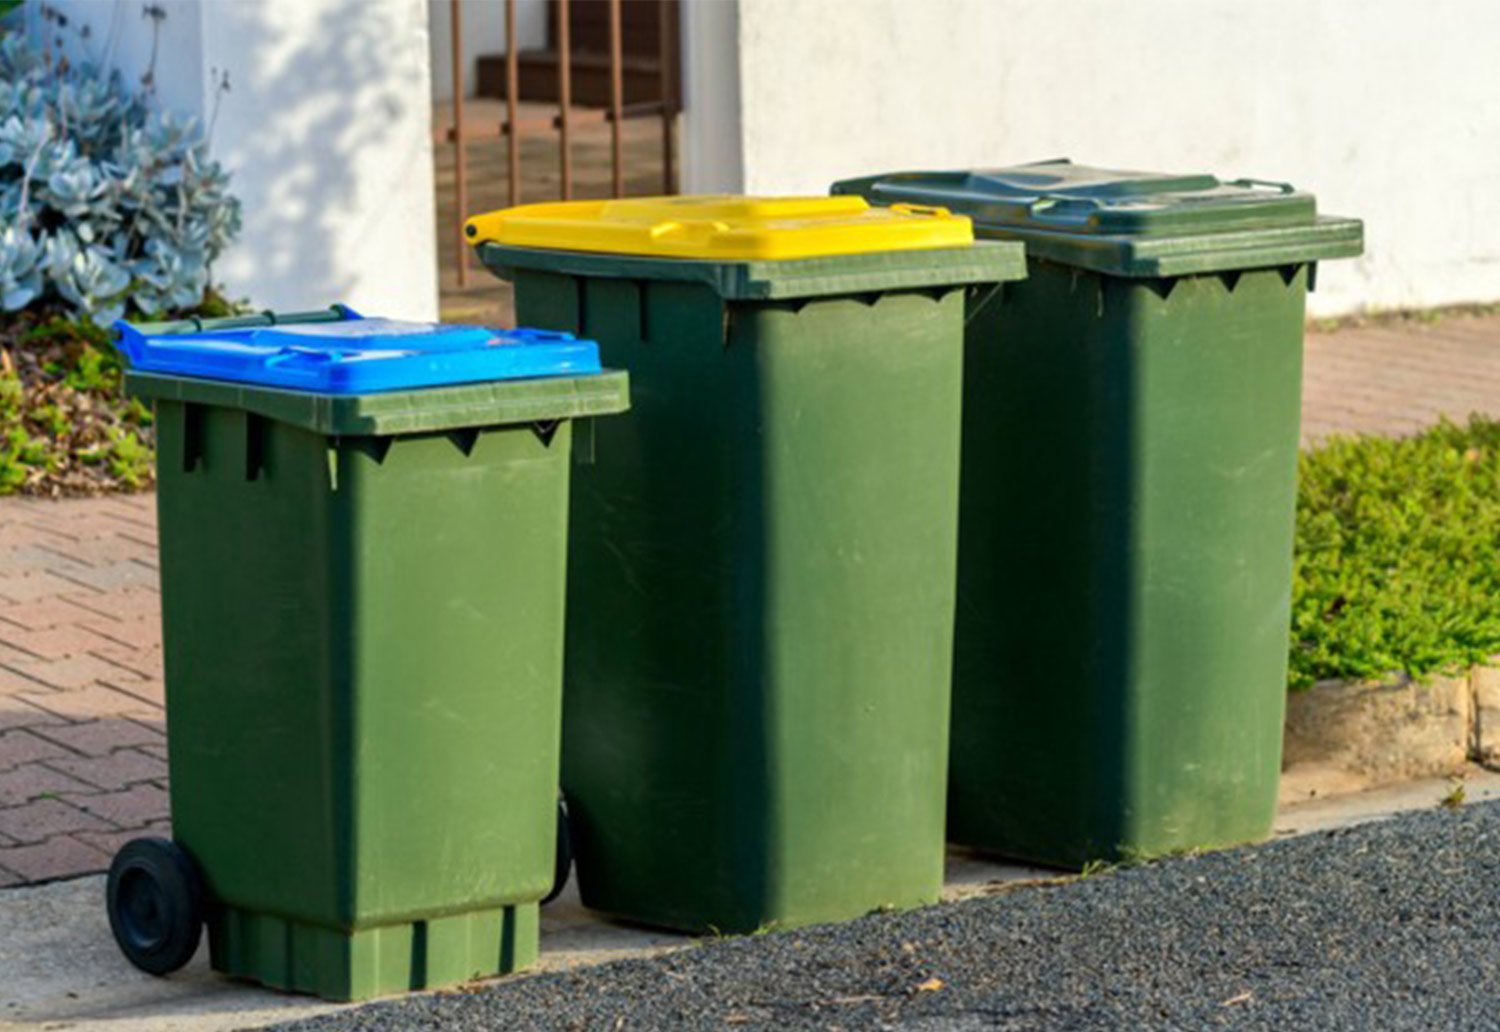 Image of kerbside collections bins